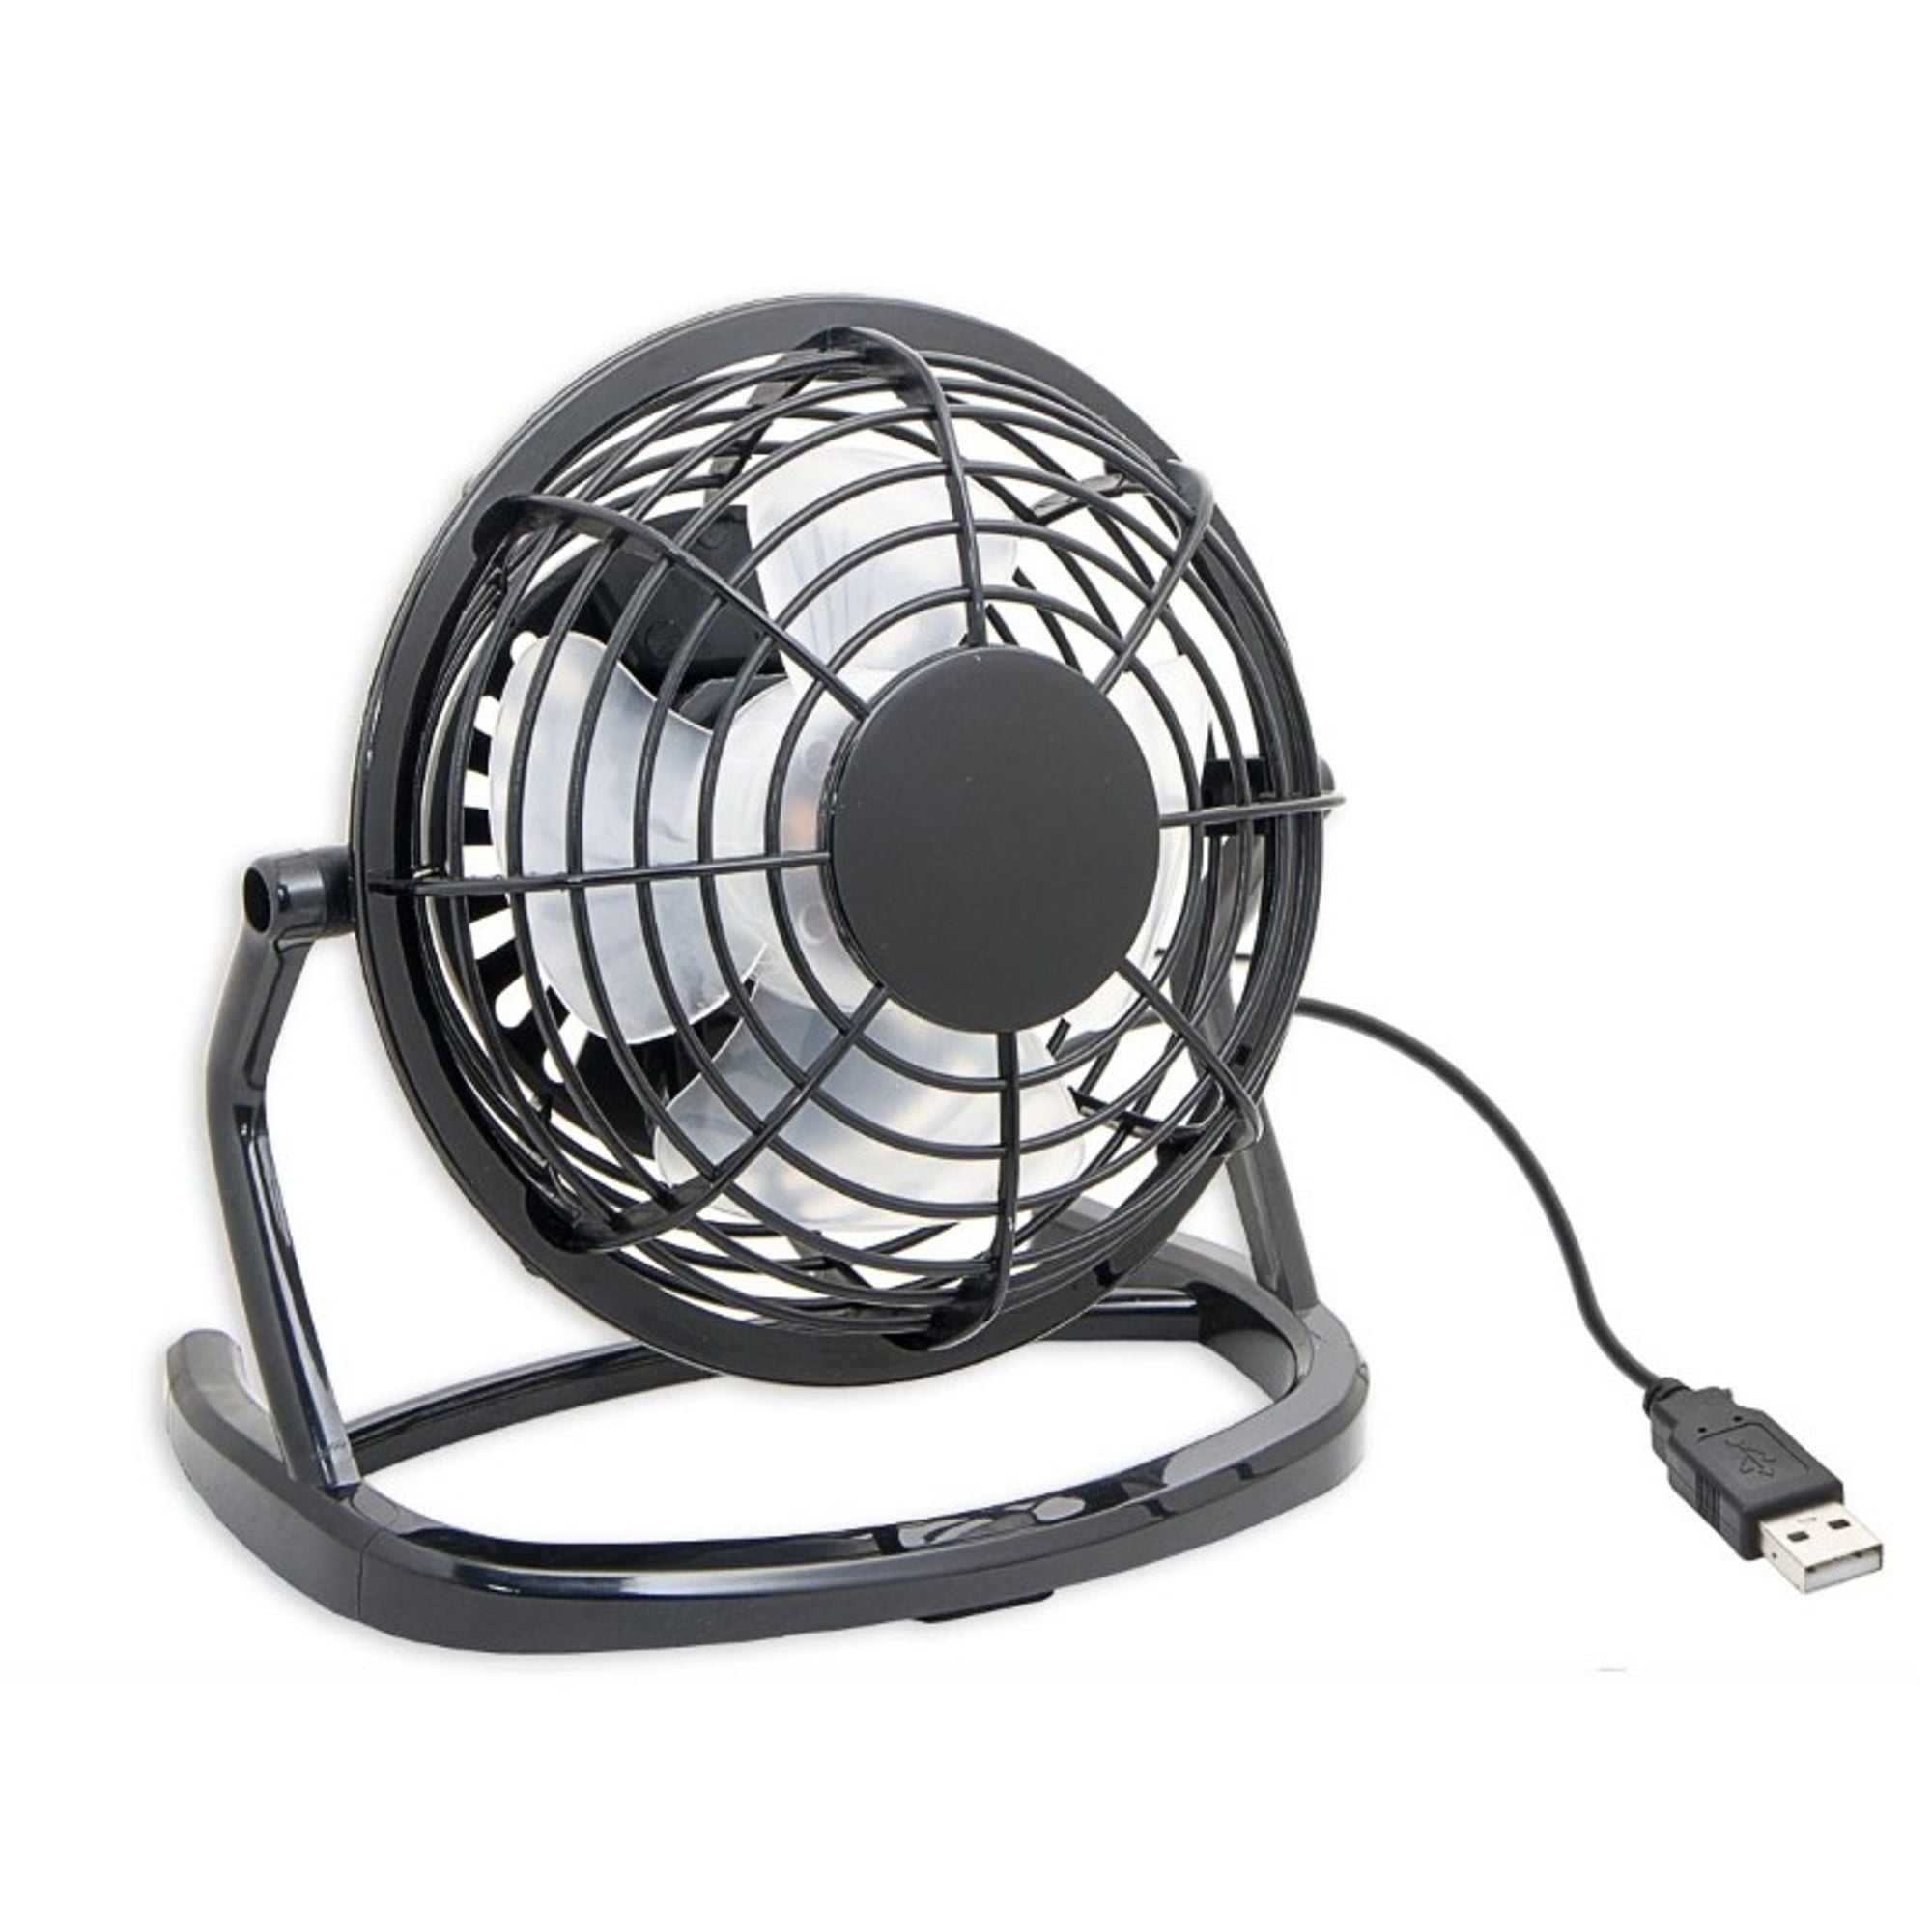 Camping Office YANGYA Portable Mini Handheld Desktop Fans Electric USB Table Rechargeable Fan for Home Outdoor and Travel-Black 